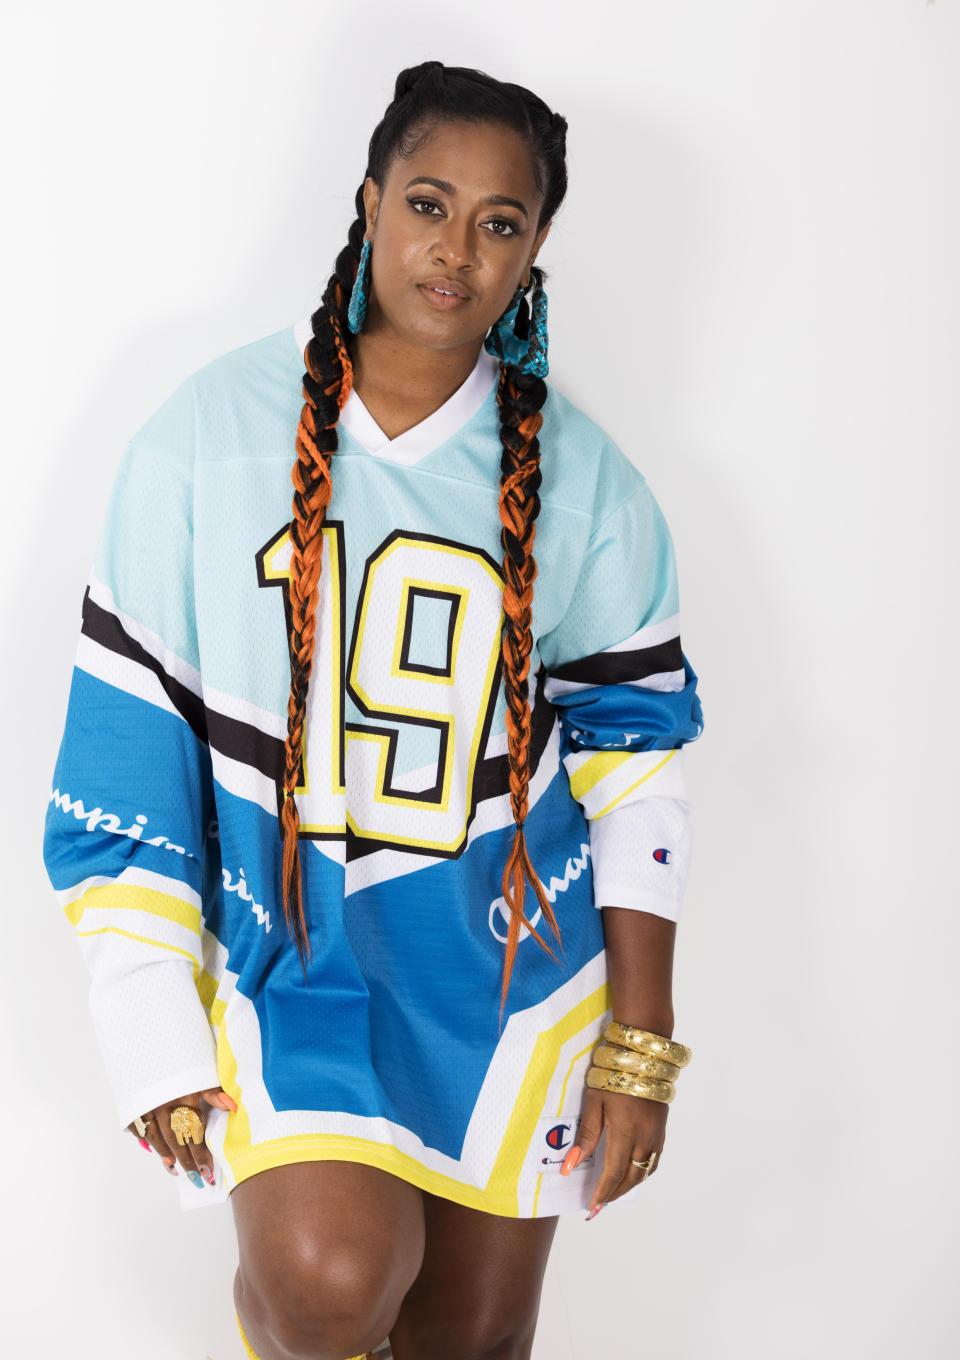 This Aug. 22, 2019 photo shows Rapsody posing for a portrait in New York to promote her latest album "Eve." (Photo by Brian Ach/Invision/AP)